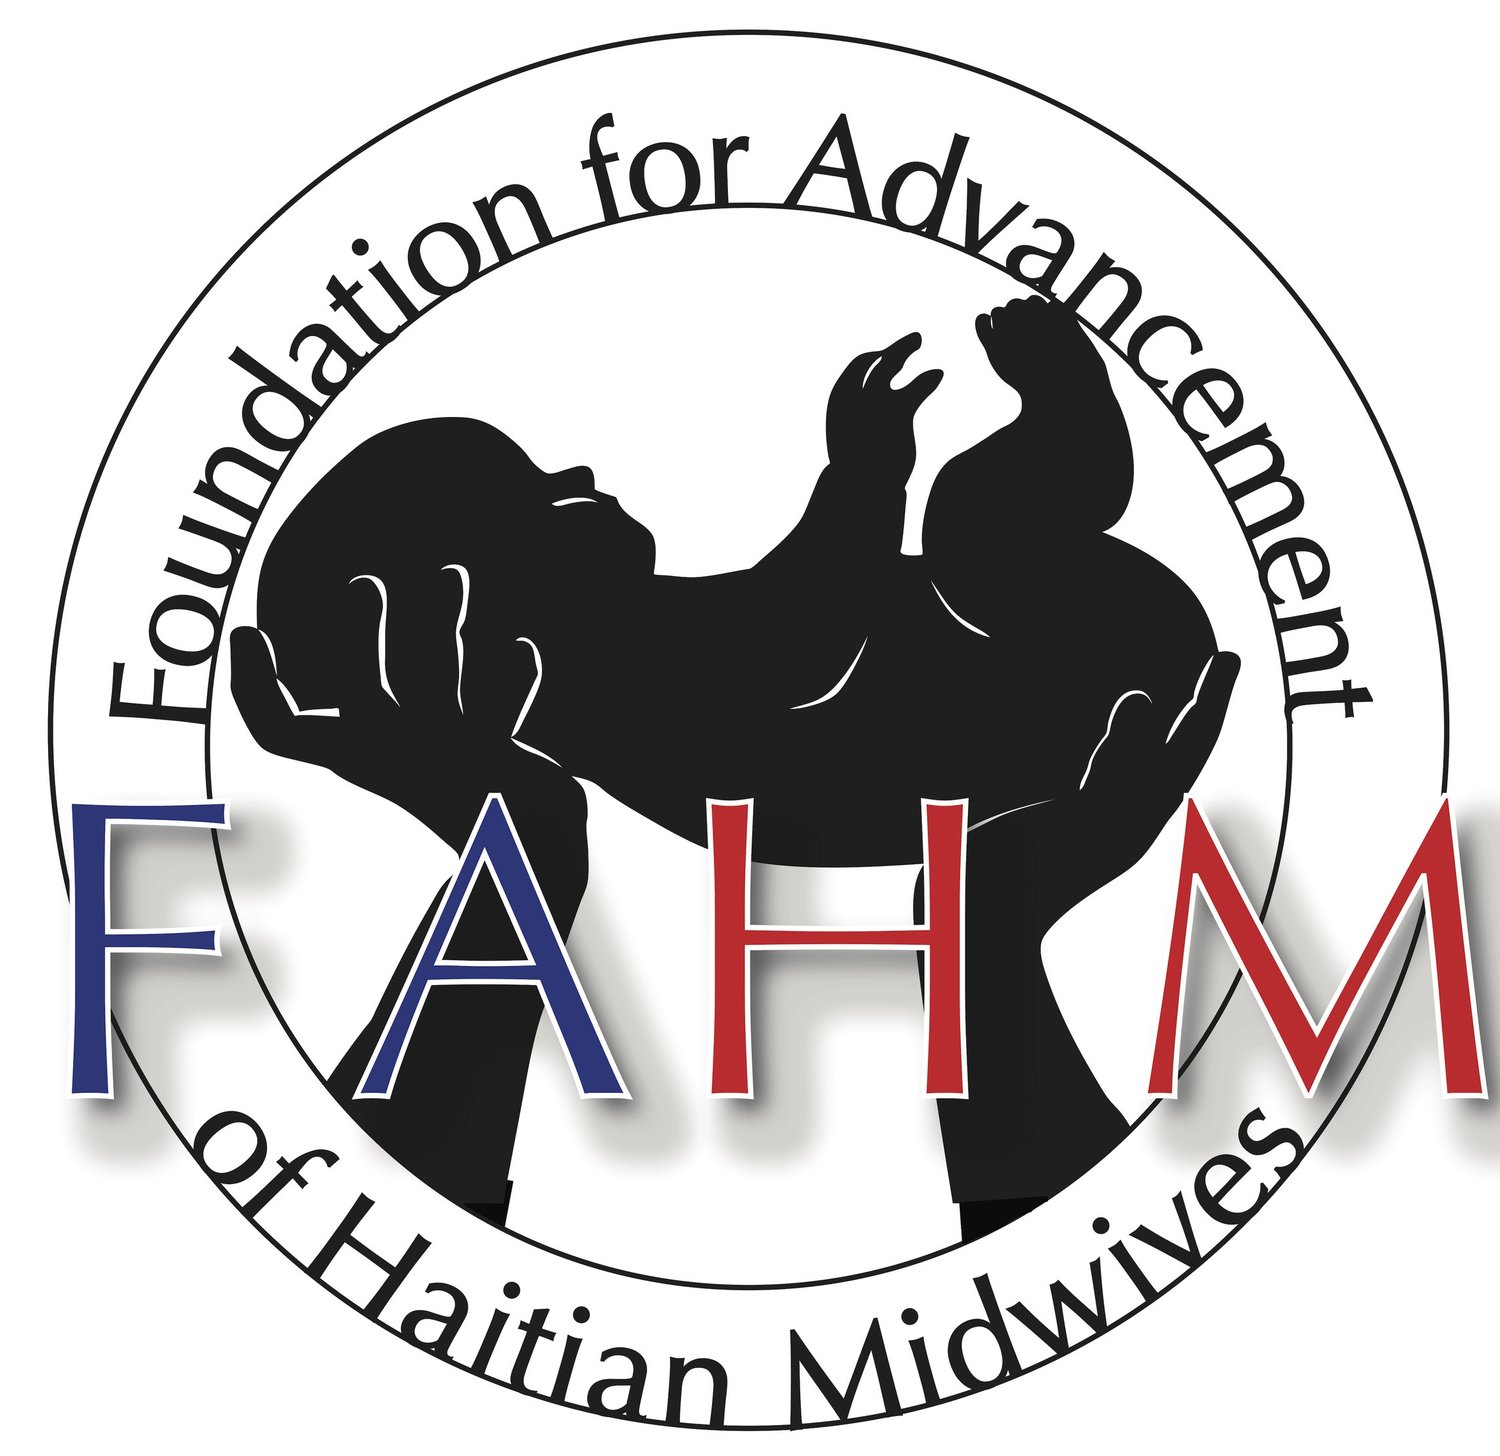 Foundation for Advancement of Haitian Midwives